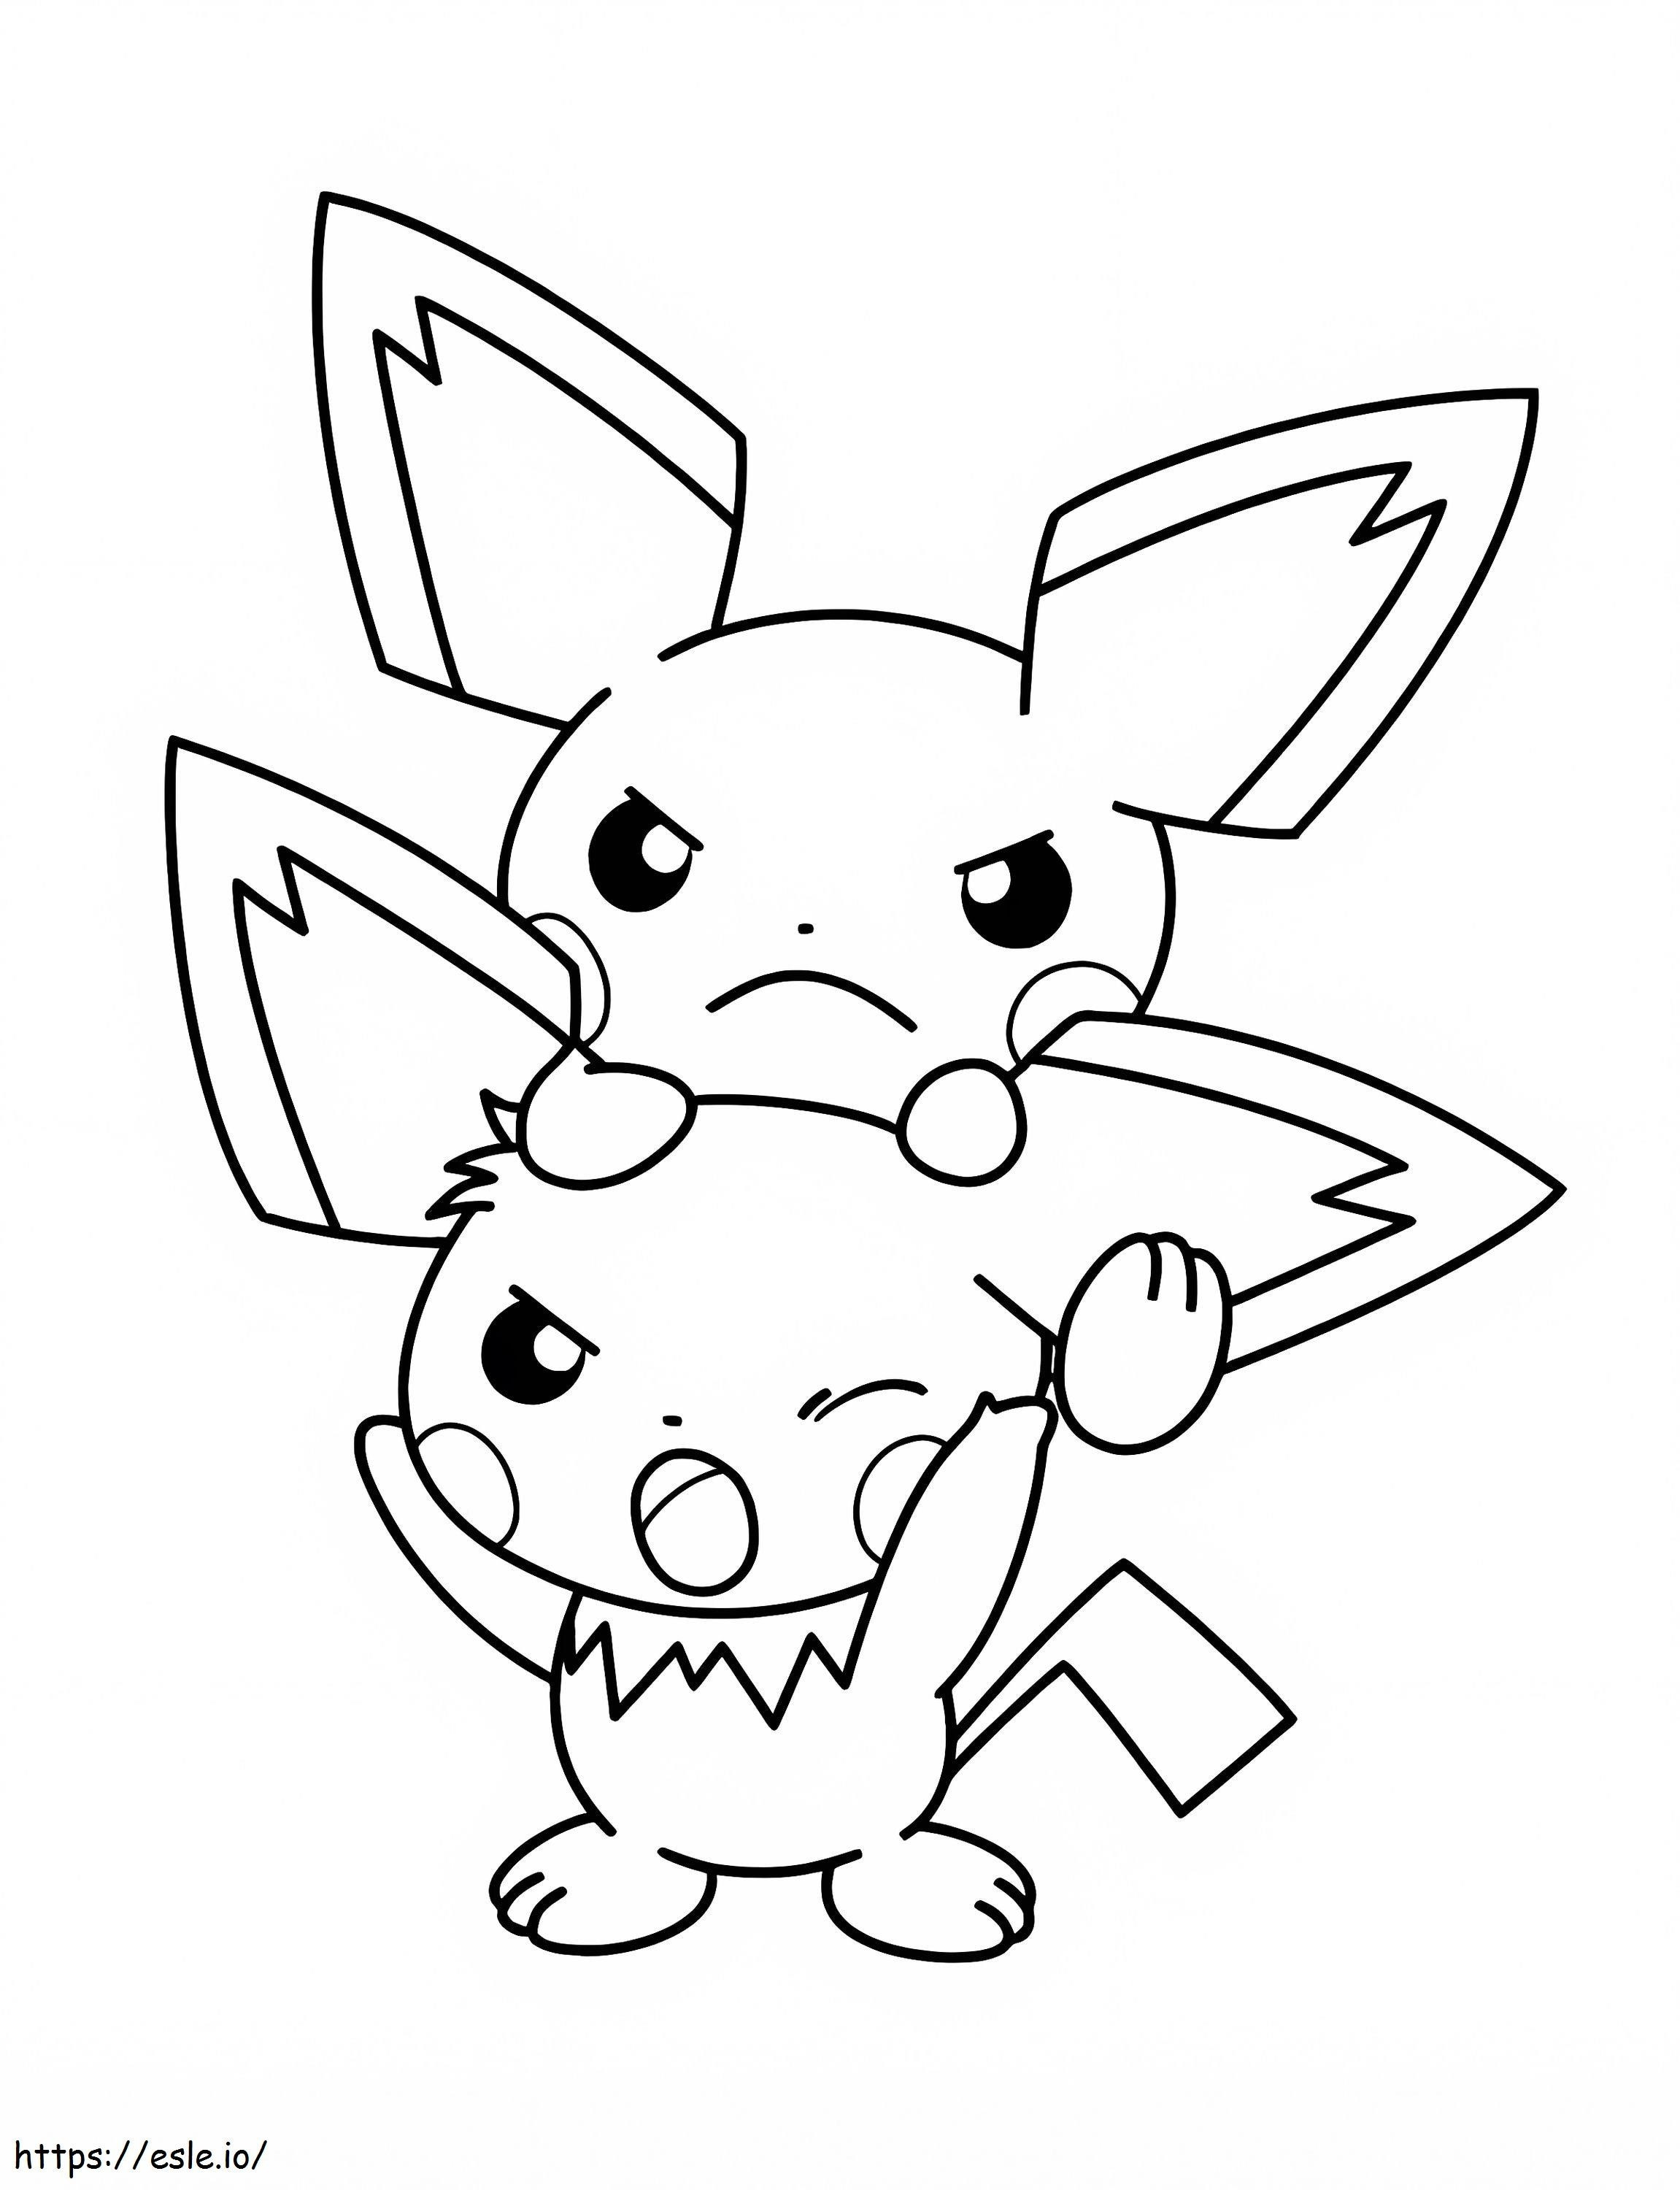 Pichu And Pikachu Angry coloring page